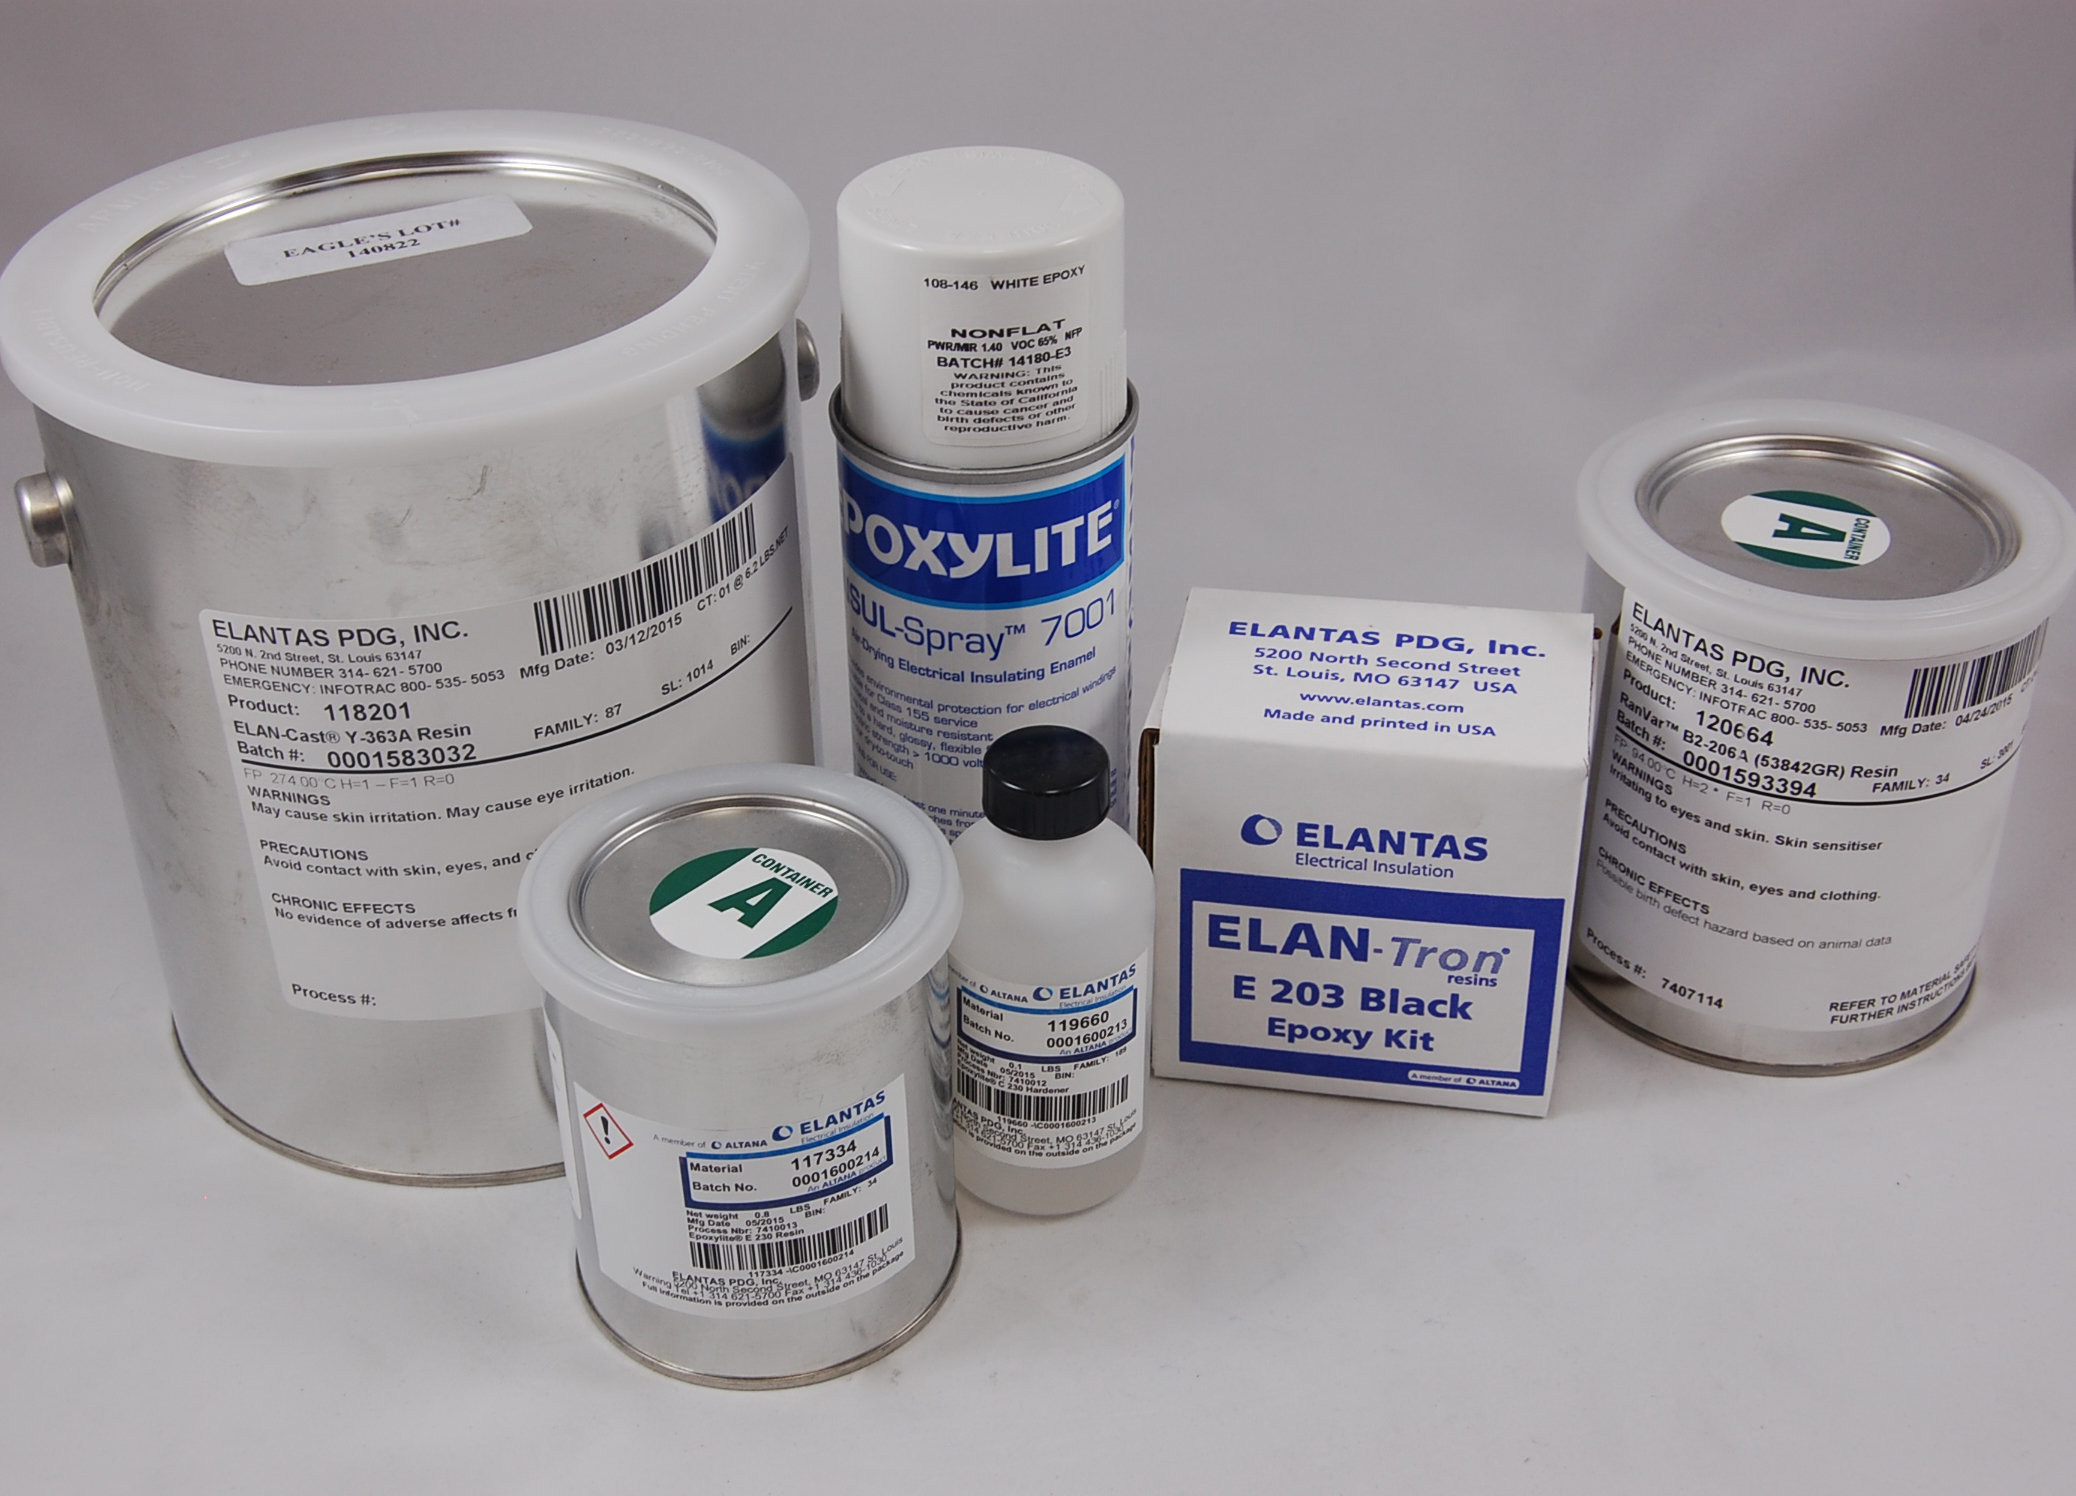 Epoxylite E 8117 Yellow Resin/C 8117 Blue Hardener Green Two-Component Epoxy Stator Paste Kit, green, 1 PINT can